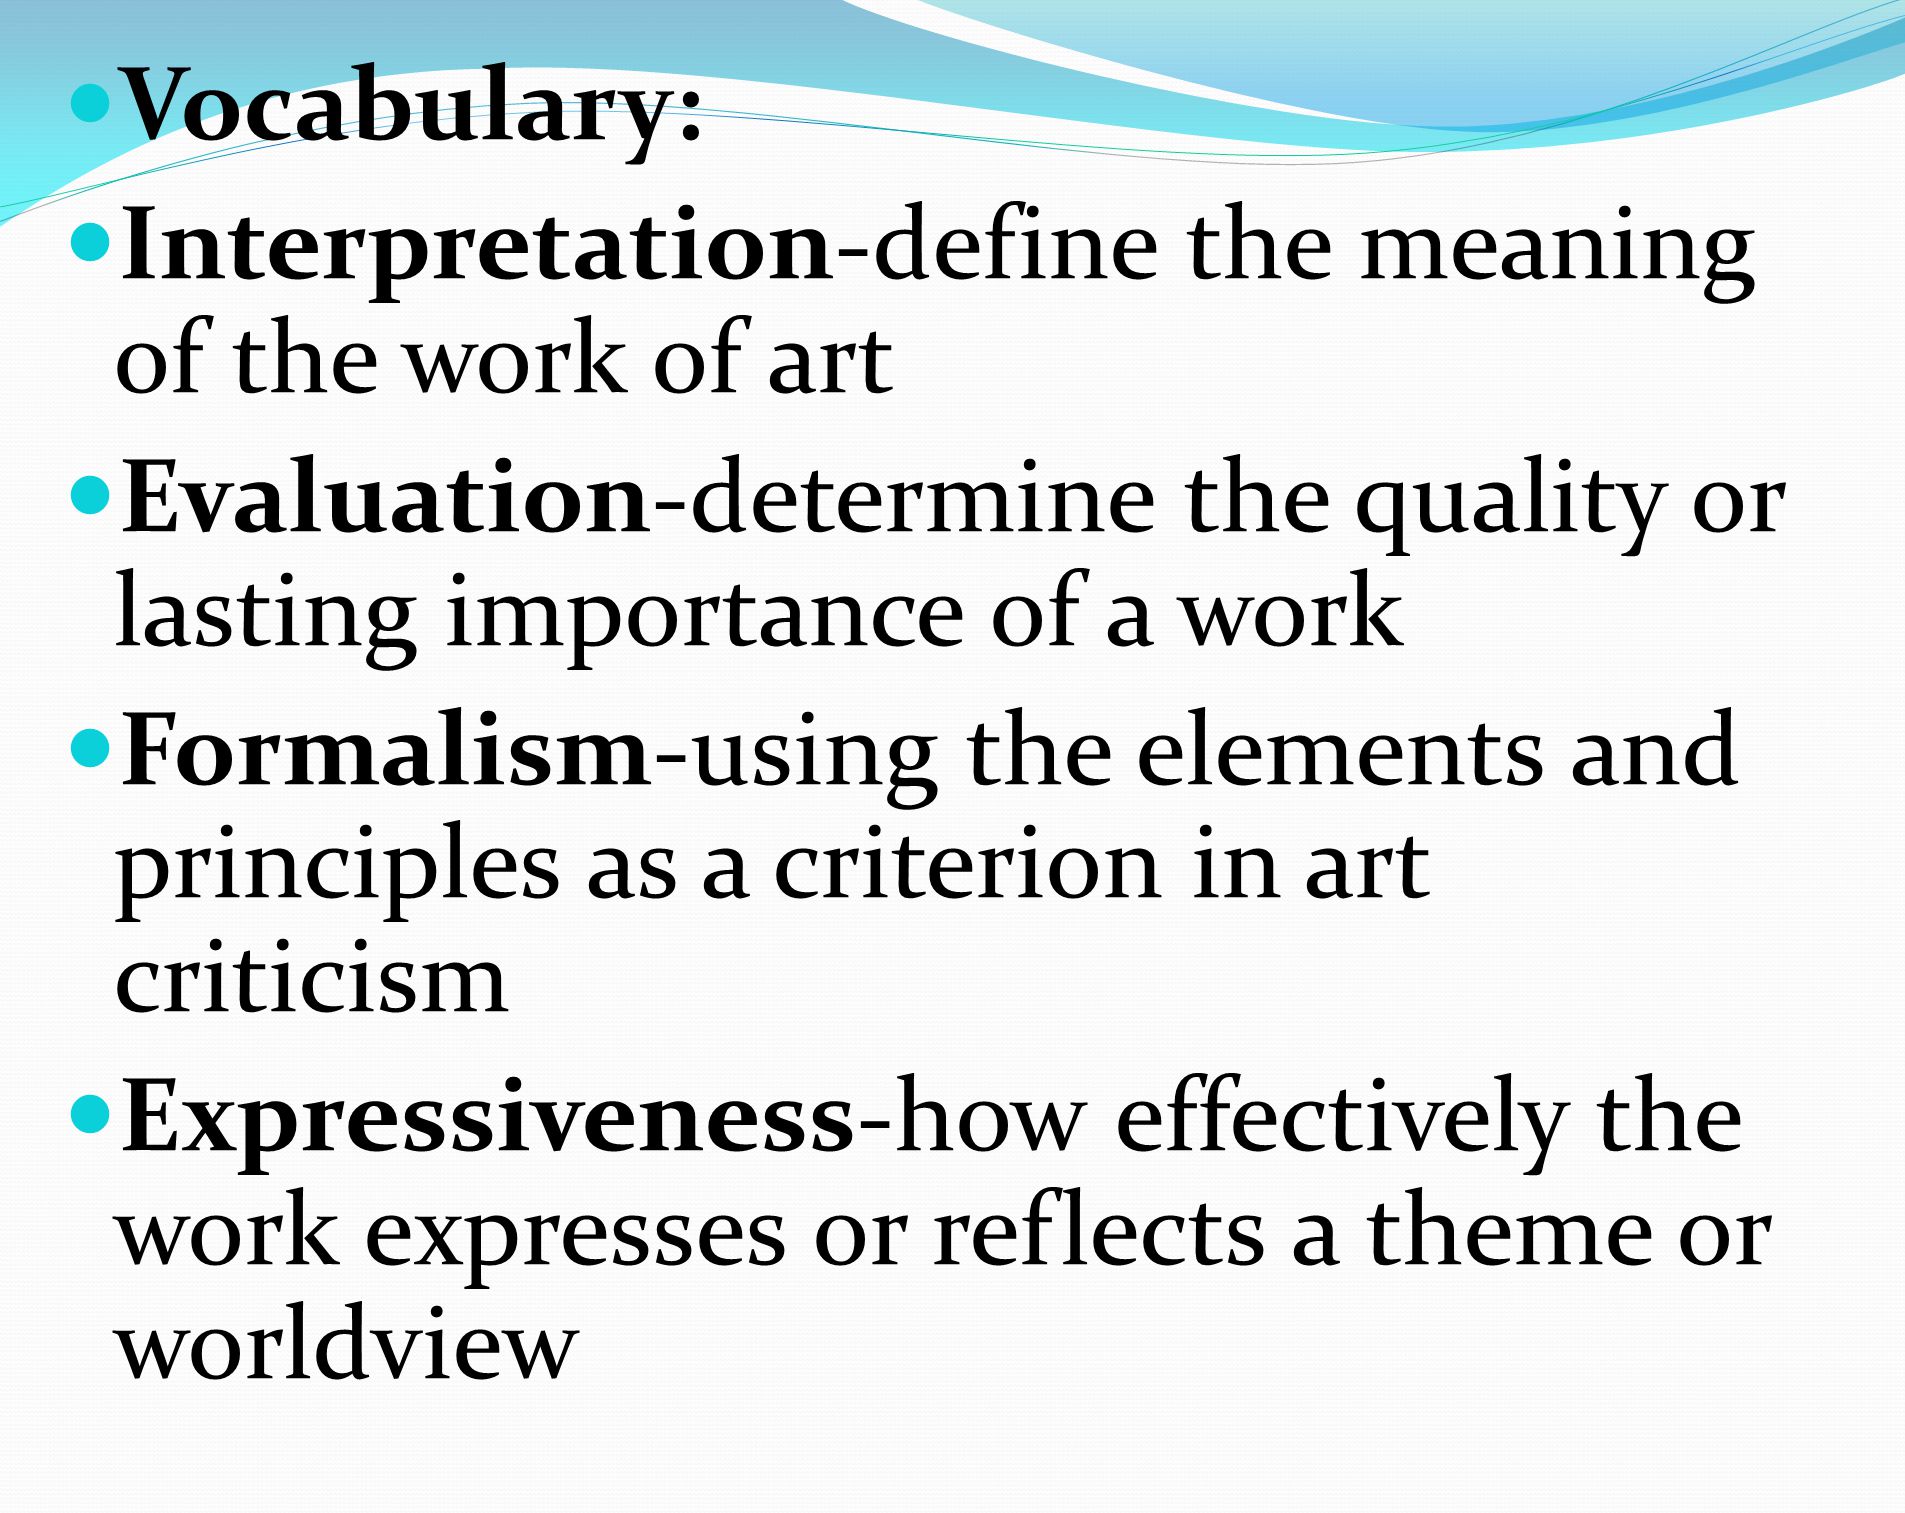 Vocabulary: Interpretation-define the meaning of the work of art. Evaluation-determine the quality or lasting importance of a work.